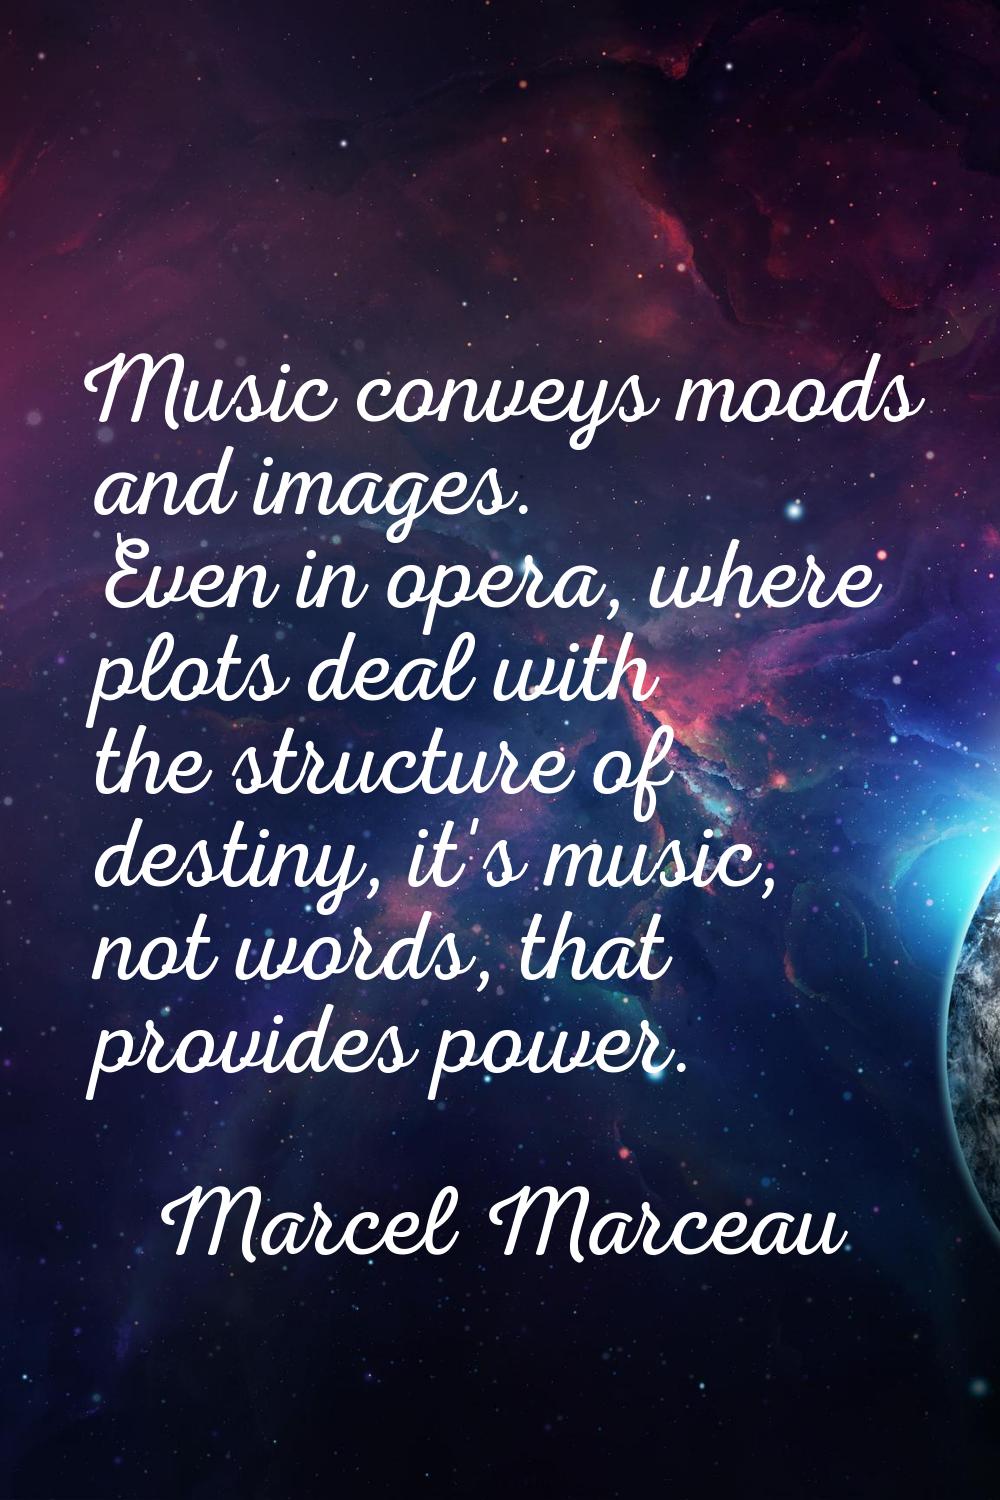 Music conveys moods and images. Even in opera, where plots deal with the structure of destiny, it's